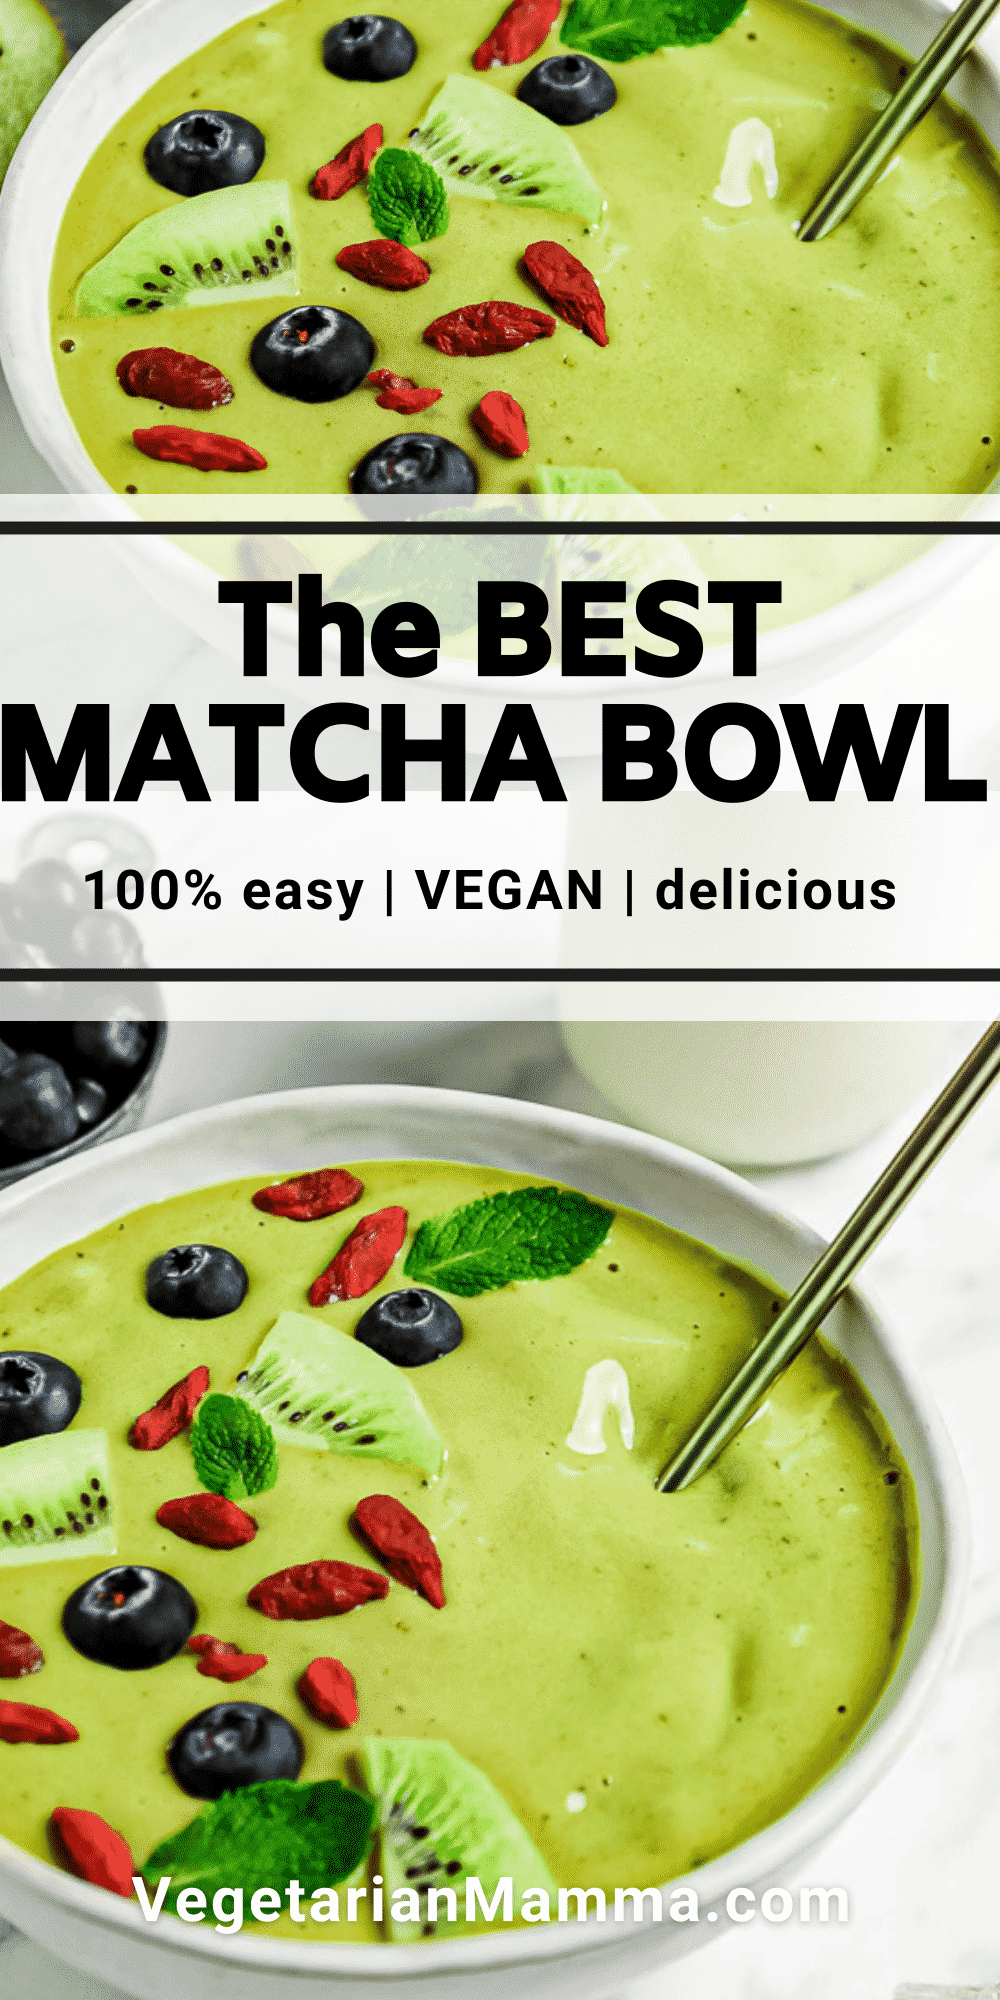 This vegan matcha bowl is a delicious and refreshing light meal for any part of the day. You can easily turn this matcha bowl into a matcha smoothie by pouring into a glass and enjoying with a straw!